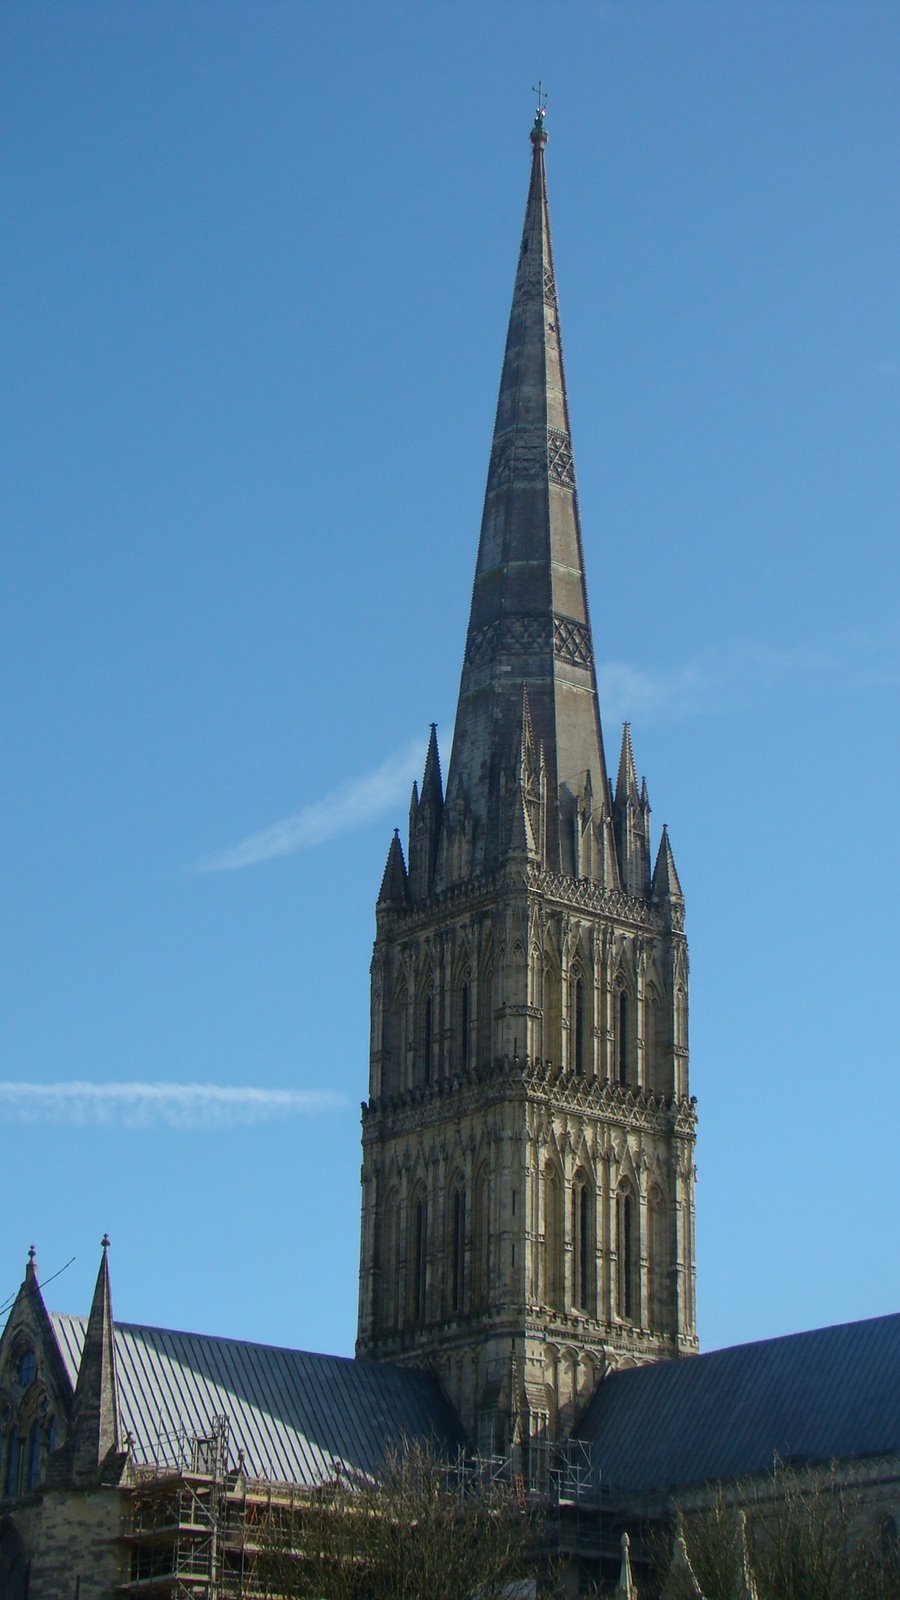 [The+spire+of+Salisbury+Cathedral.jpg]